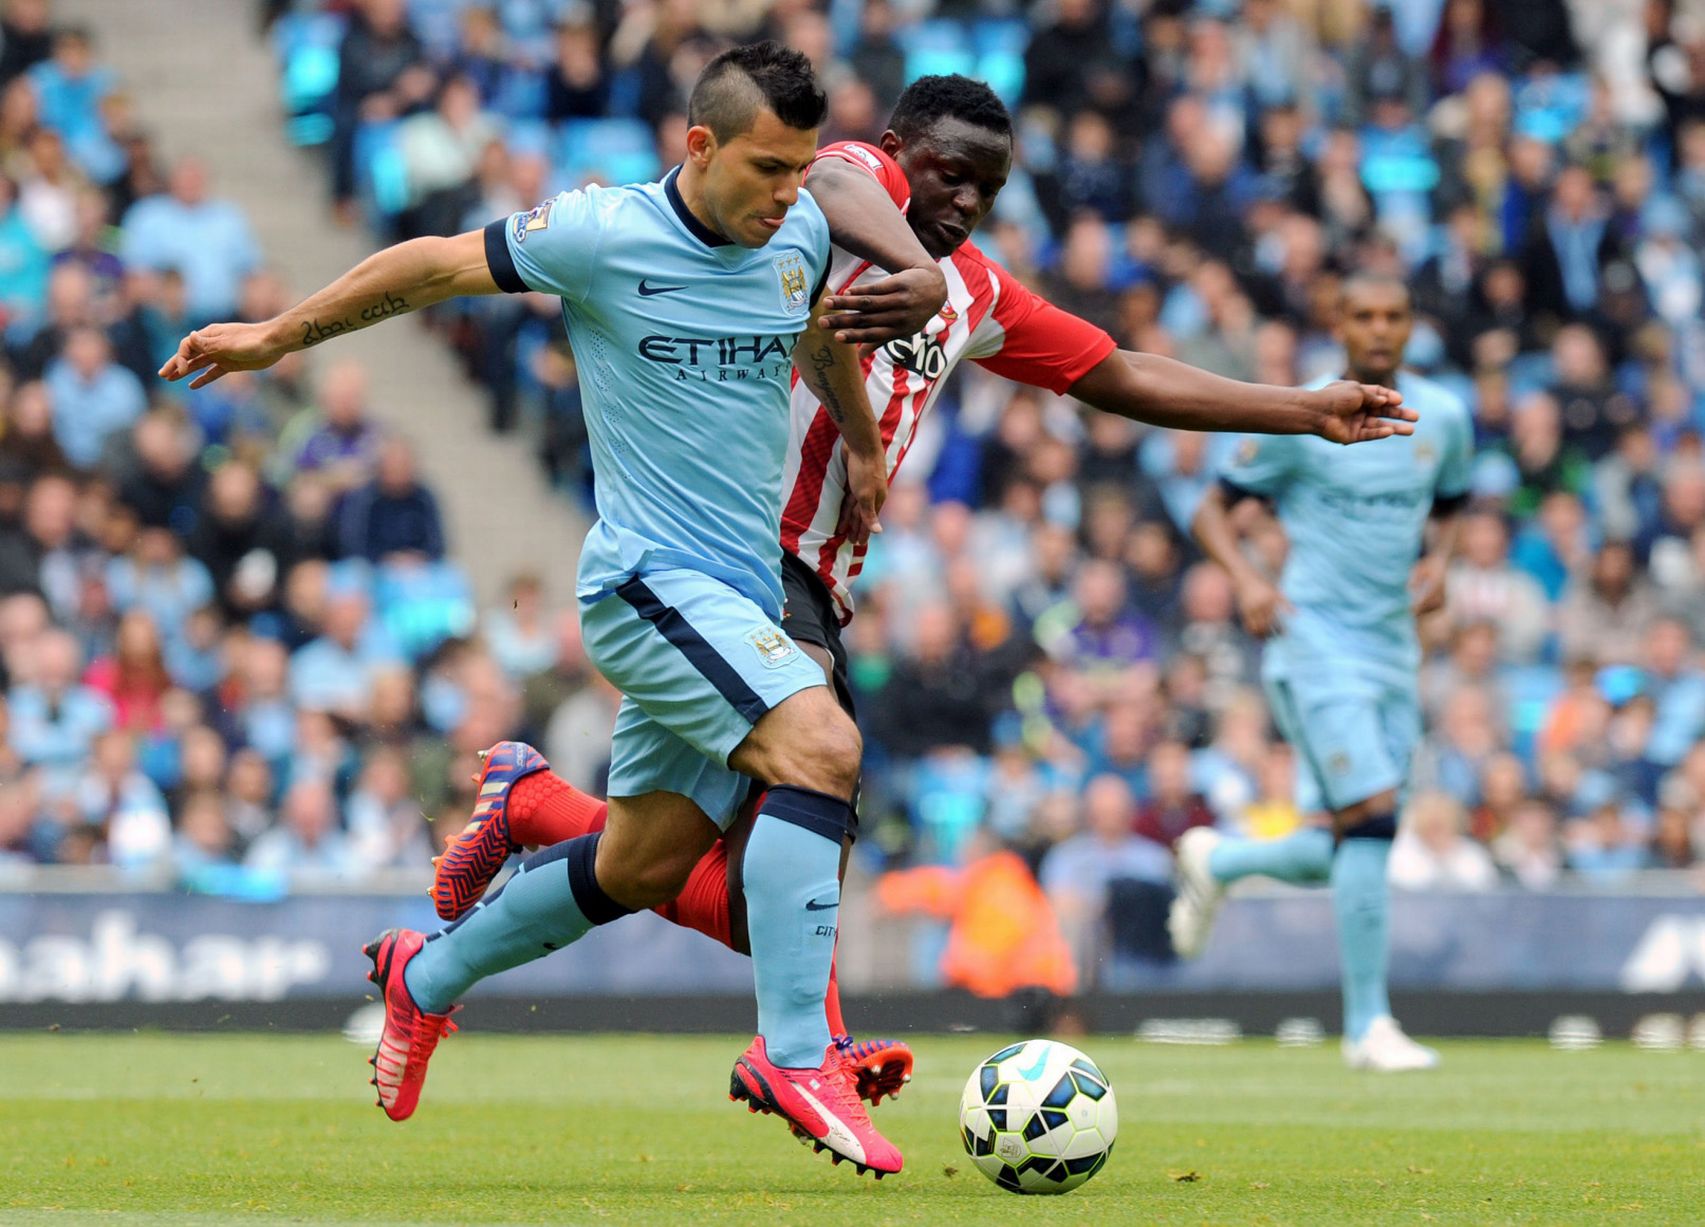 Sergio Aguero fights for the ball. (Courtesy: Getty)